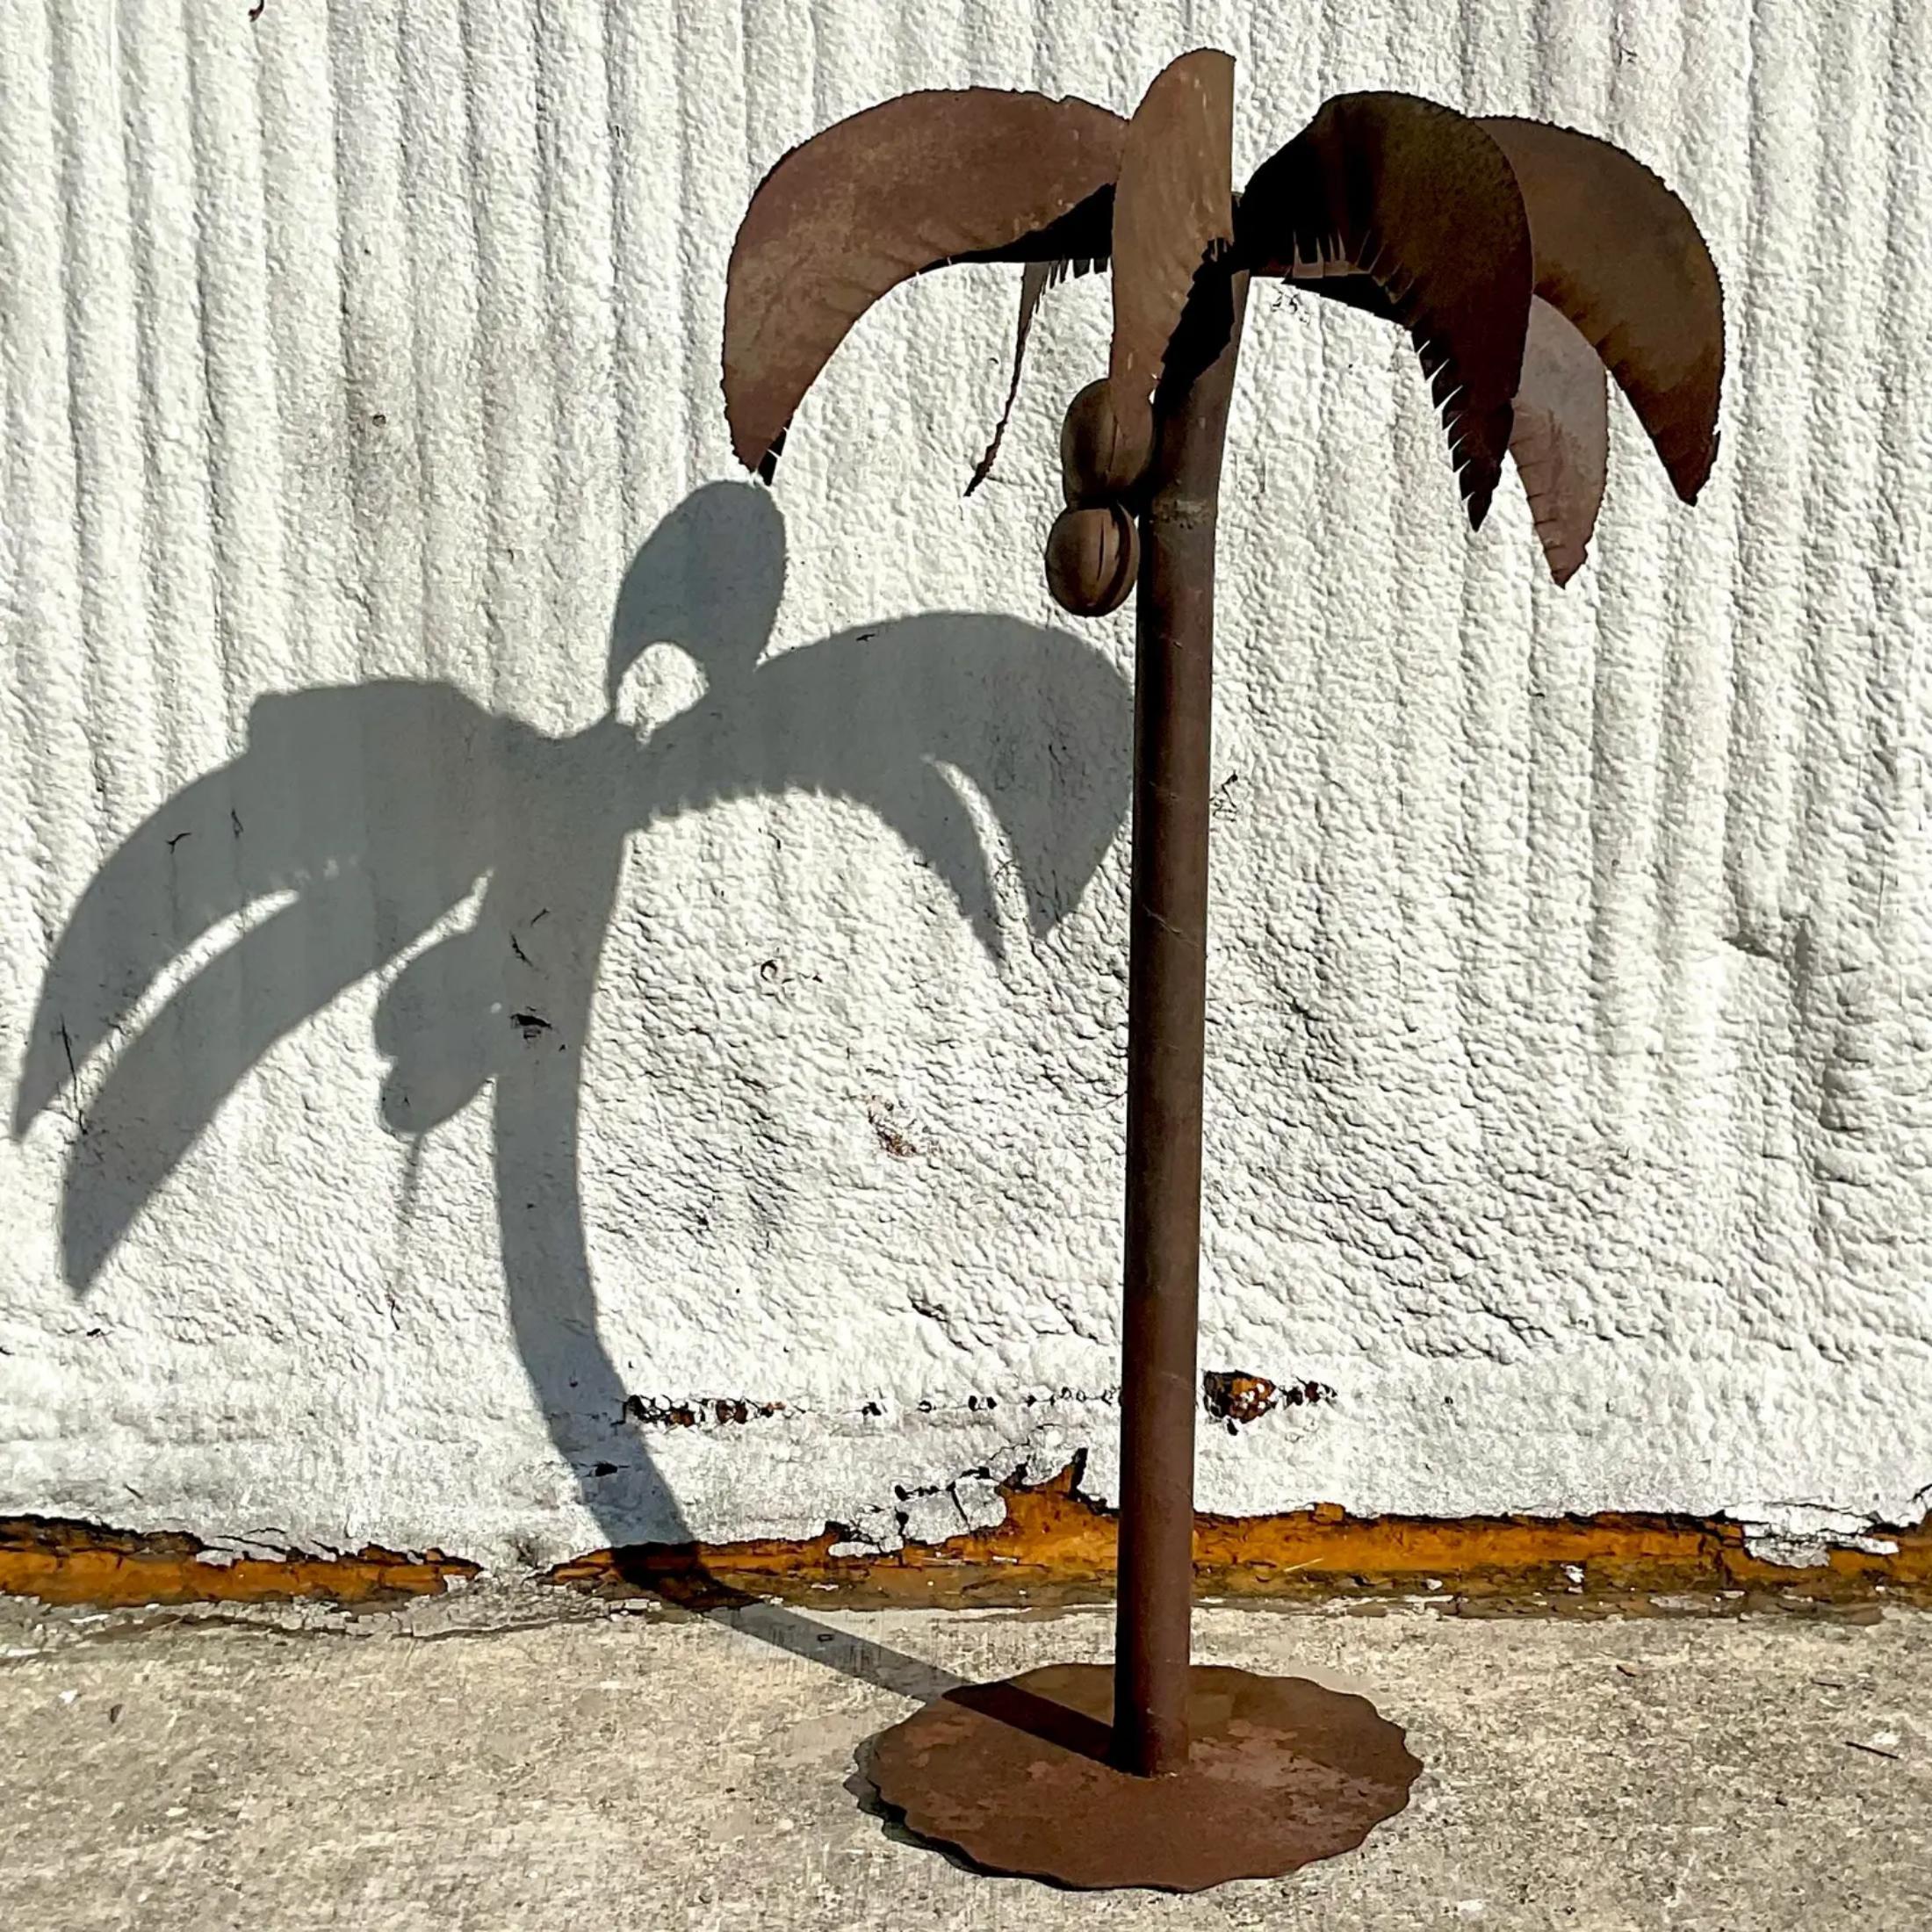 A fantastic vintage patinated metal palm tree. A chic torch cut design in a gnarly metal finish. A real boho tropical look. Acquired from a Palm Beach estate.